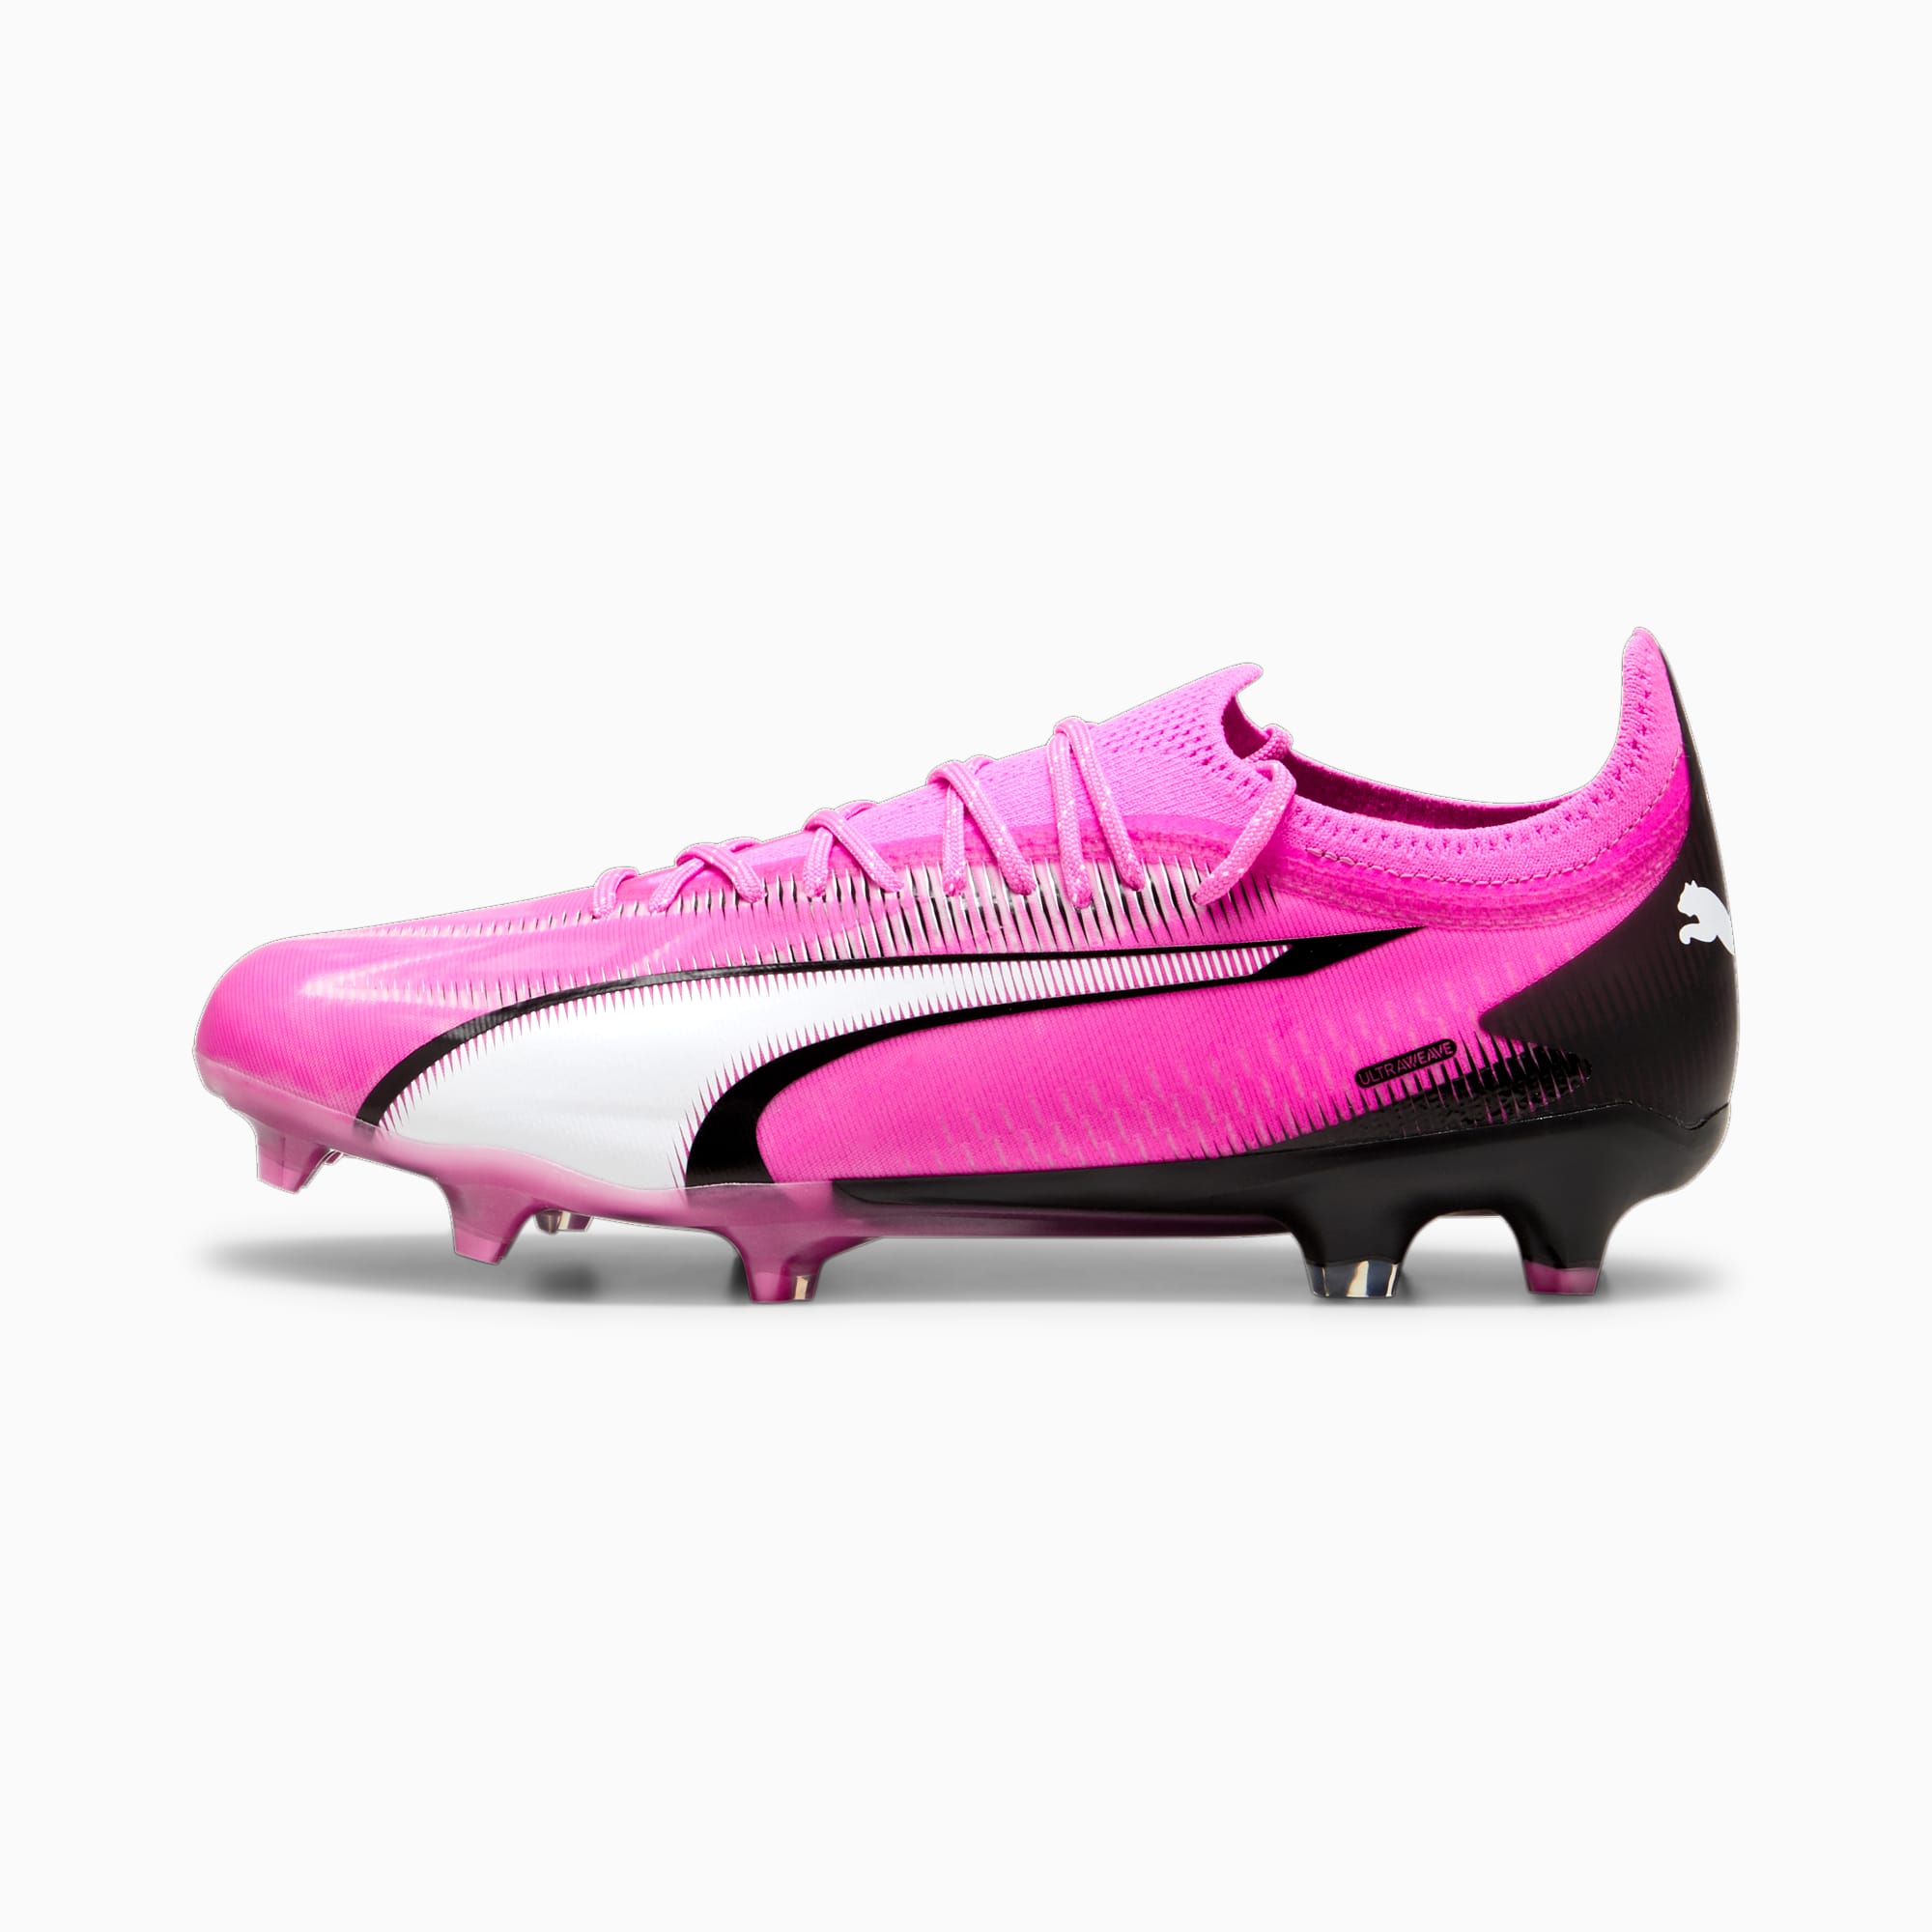 ULTRA ULTIMATE Firm Ground/Artificial Ground Men's Soccer Cleats | PUMA